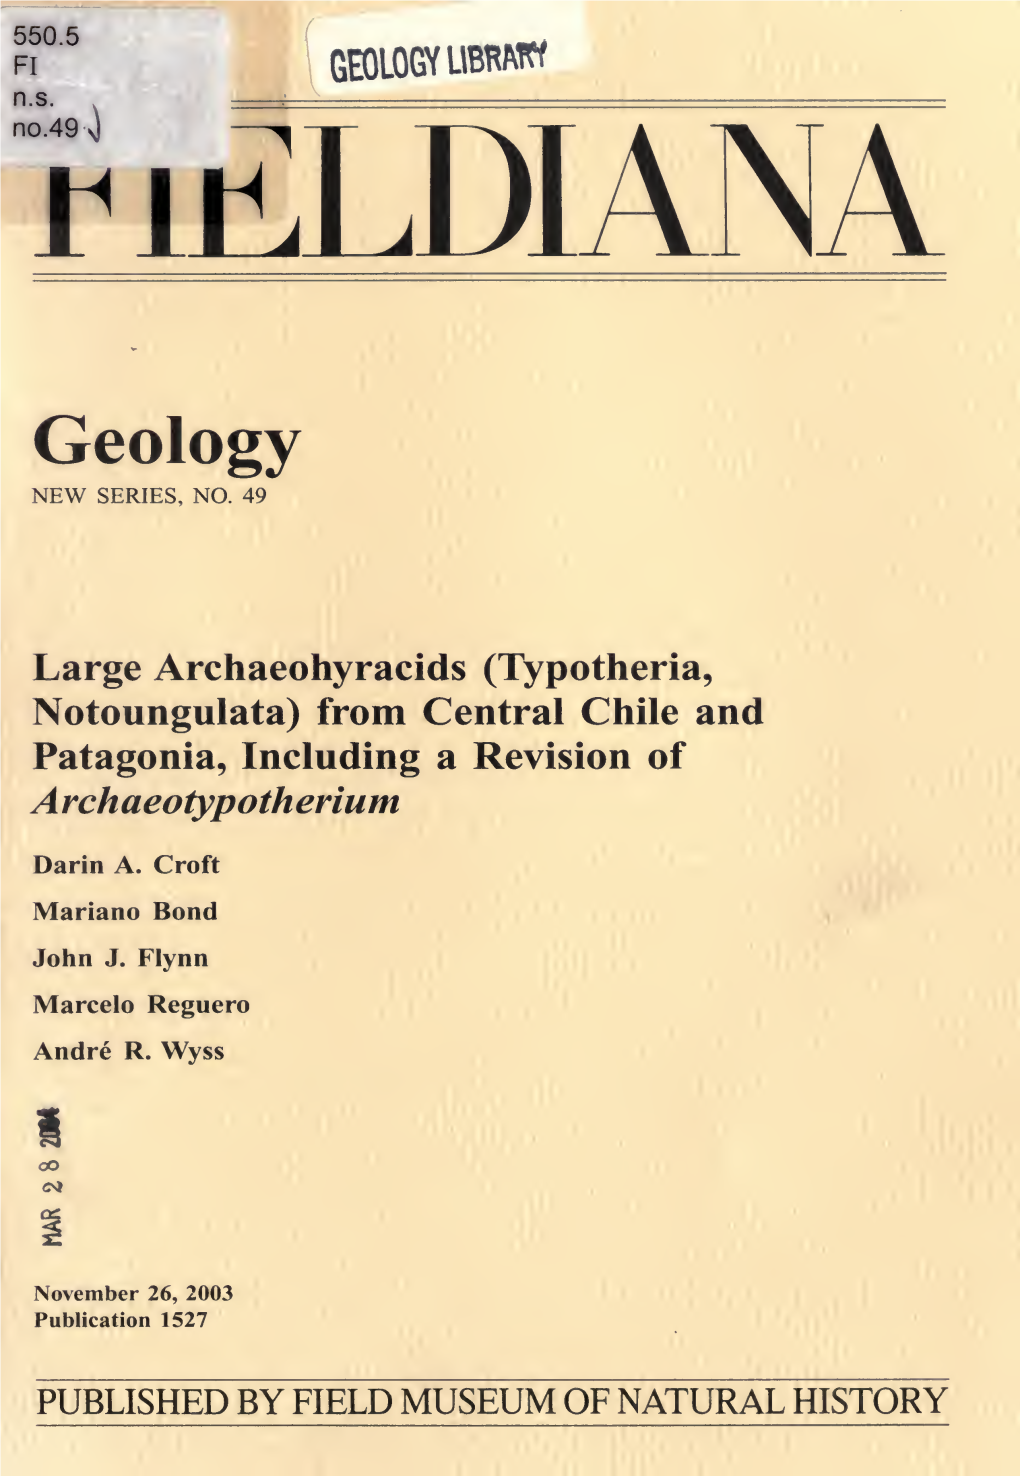 Large Archaeohyracids (Typotheria, Notoungulata) from Central Chile and Patagonia, Including a Revision of Archaeotypotherium